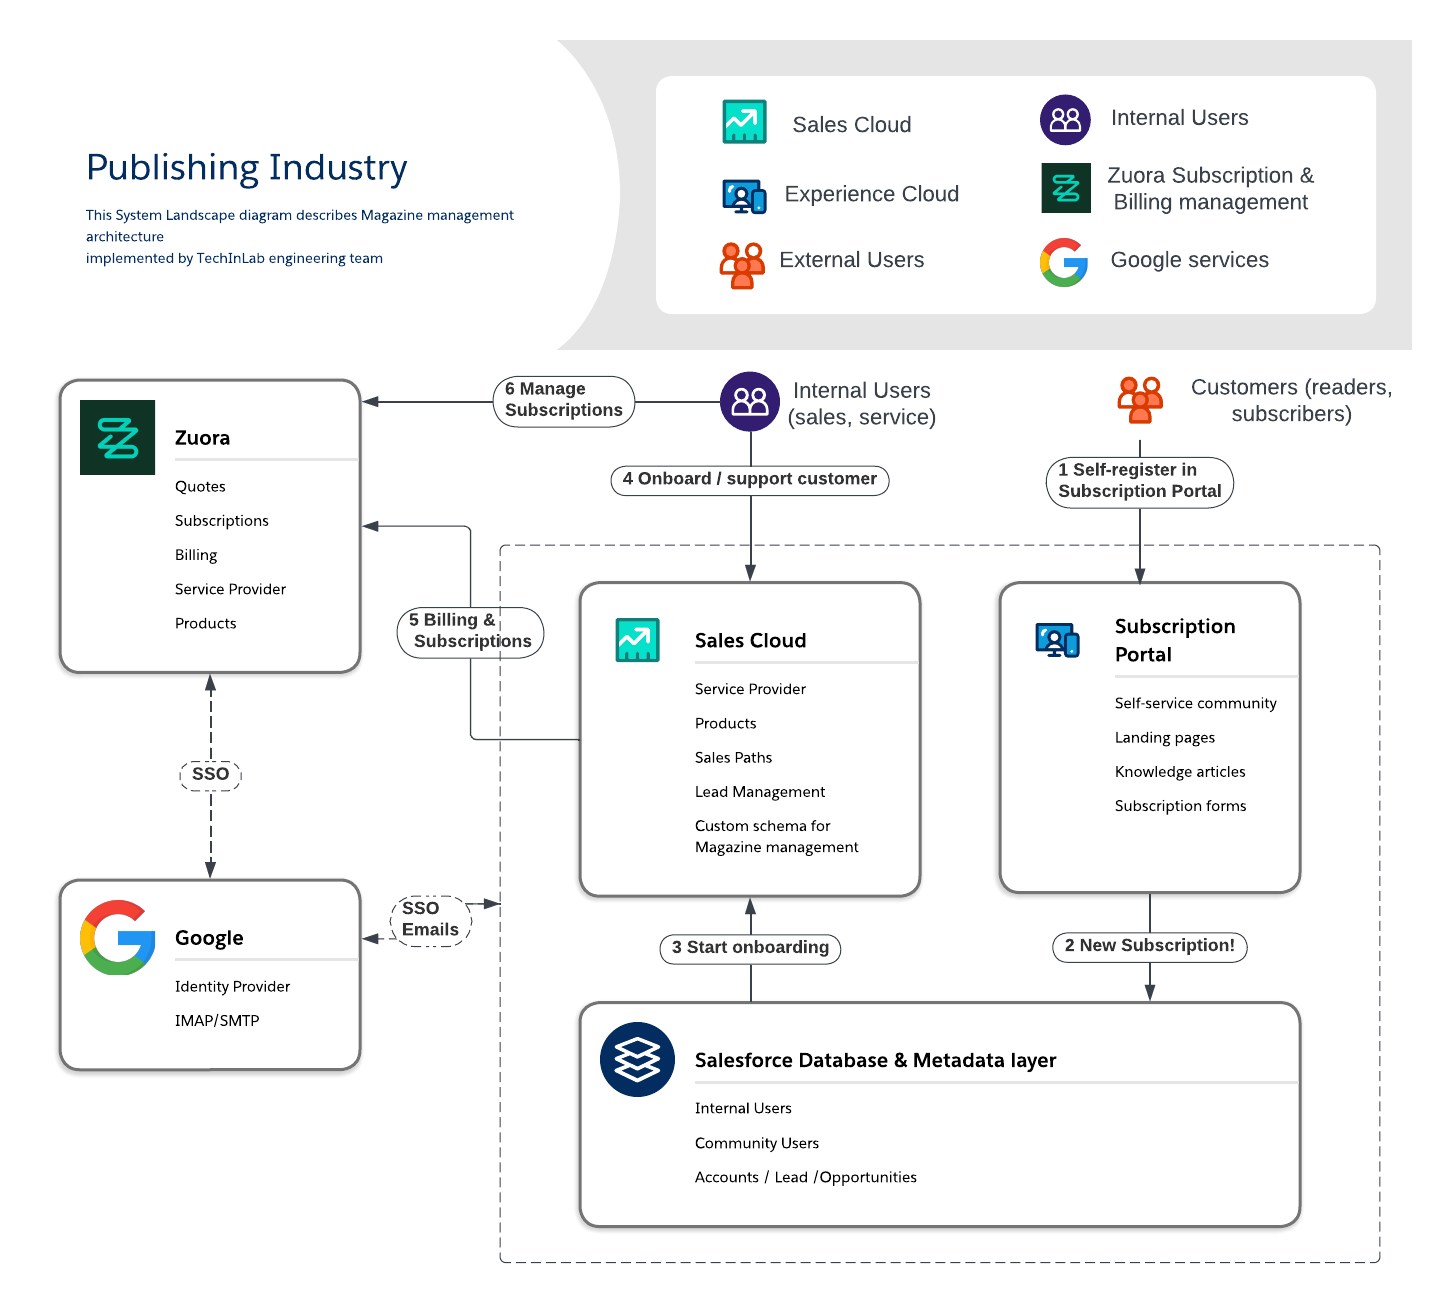 Implementation of a flexible solution for a publishing company